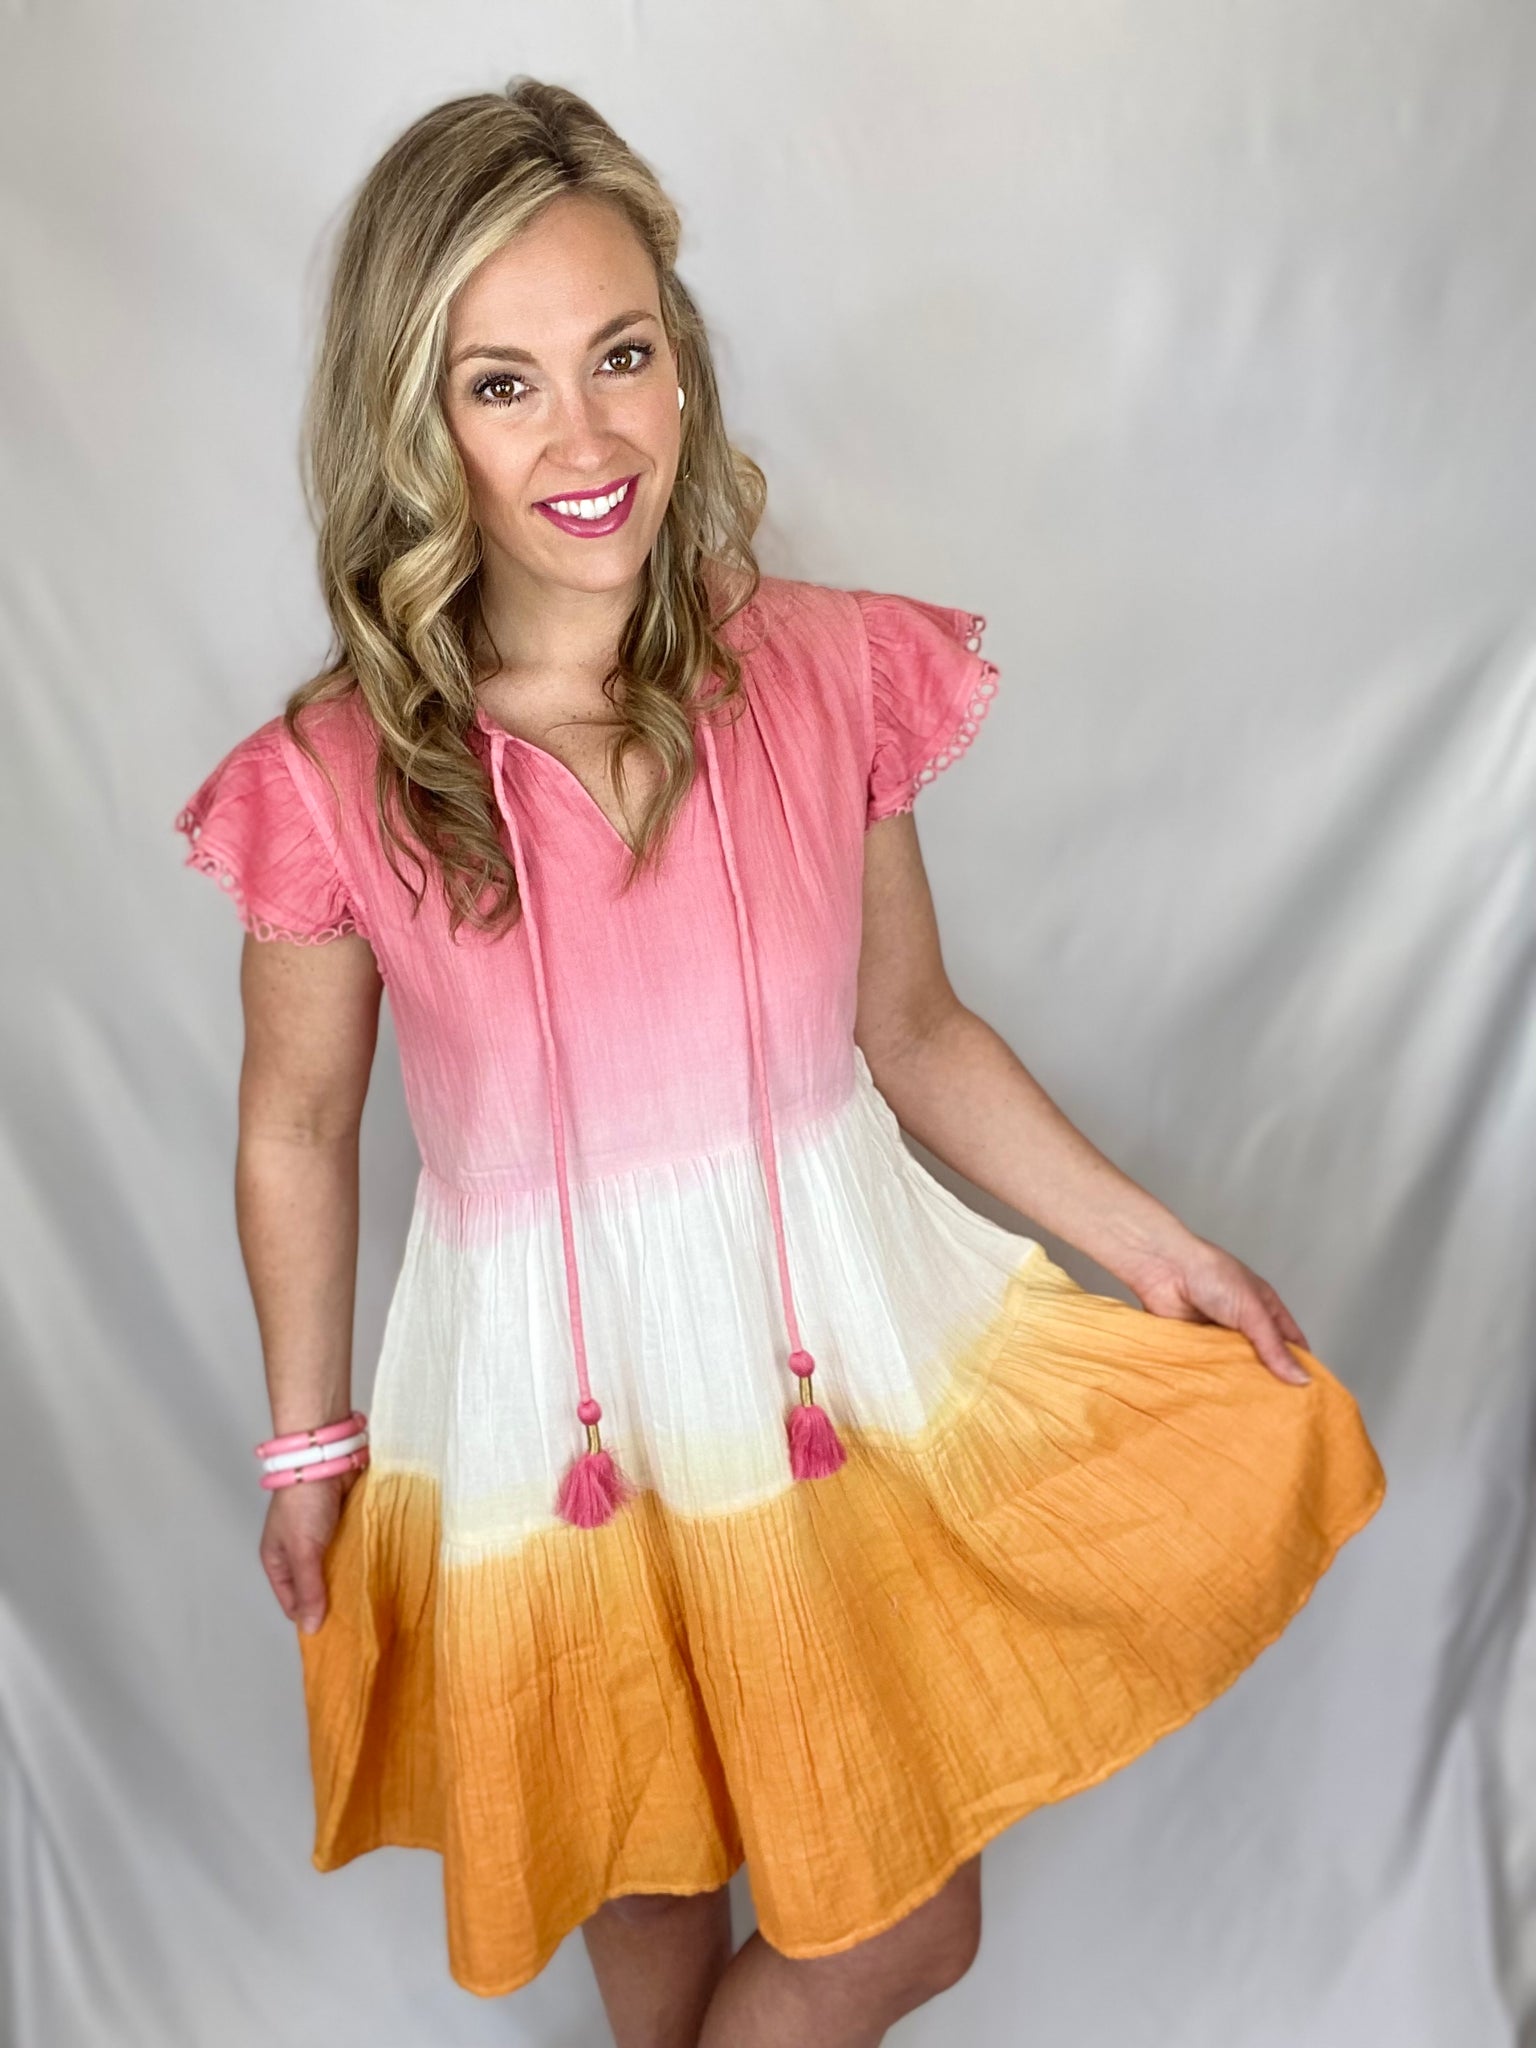 Ombre Tiered Dress